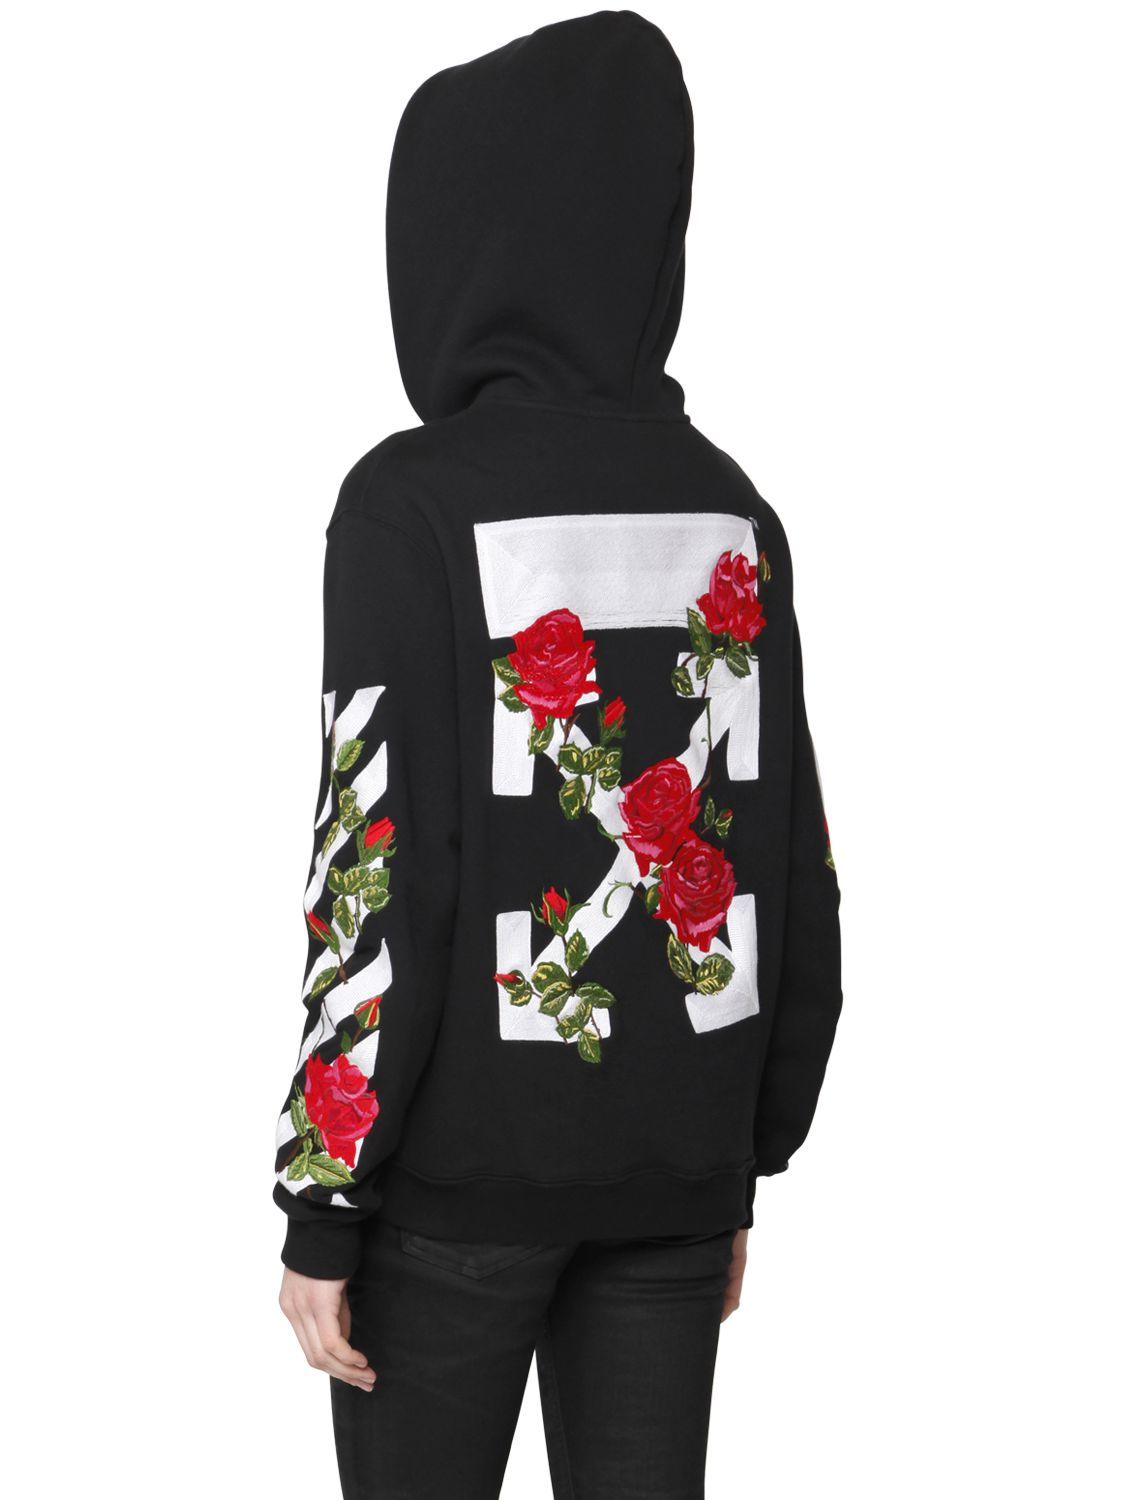 Lyst - Off-White C/O Virgil Abloh Rose Embroidery Zip-up Cotton Sweatshirt in Black